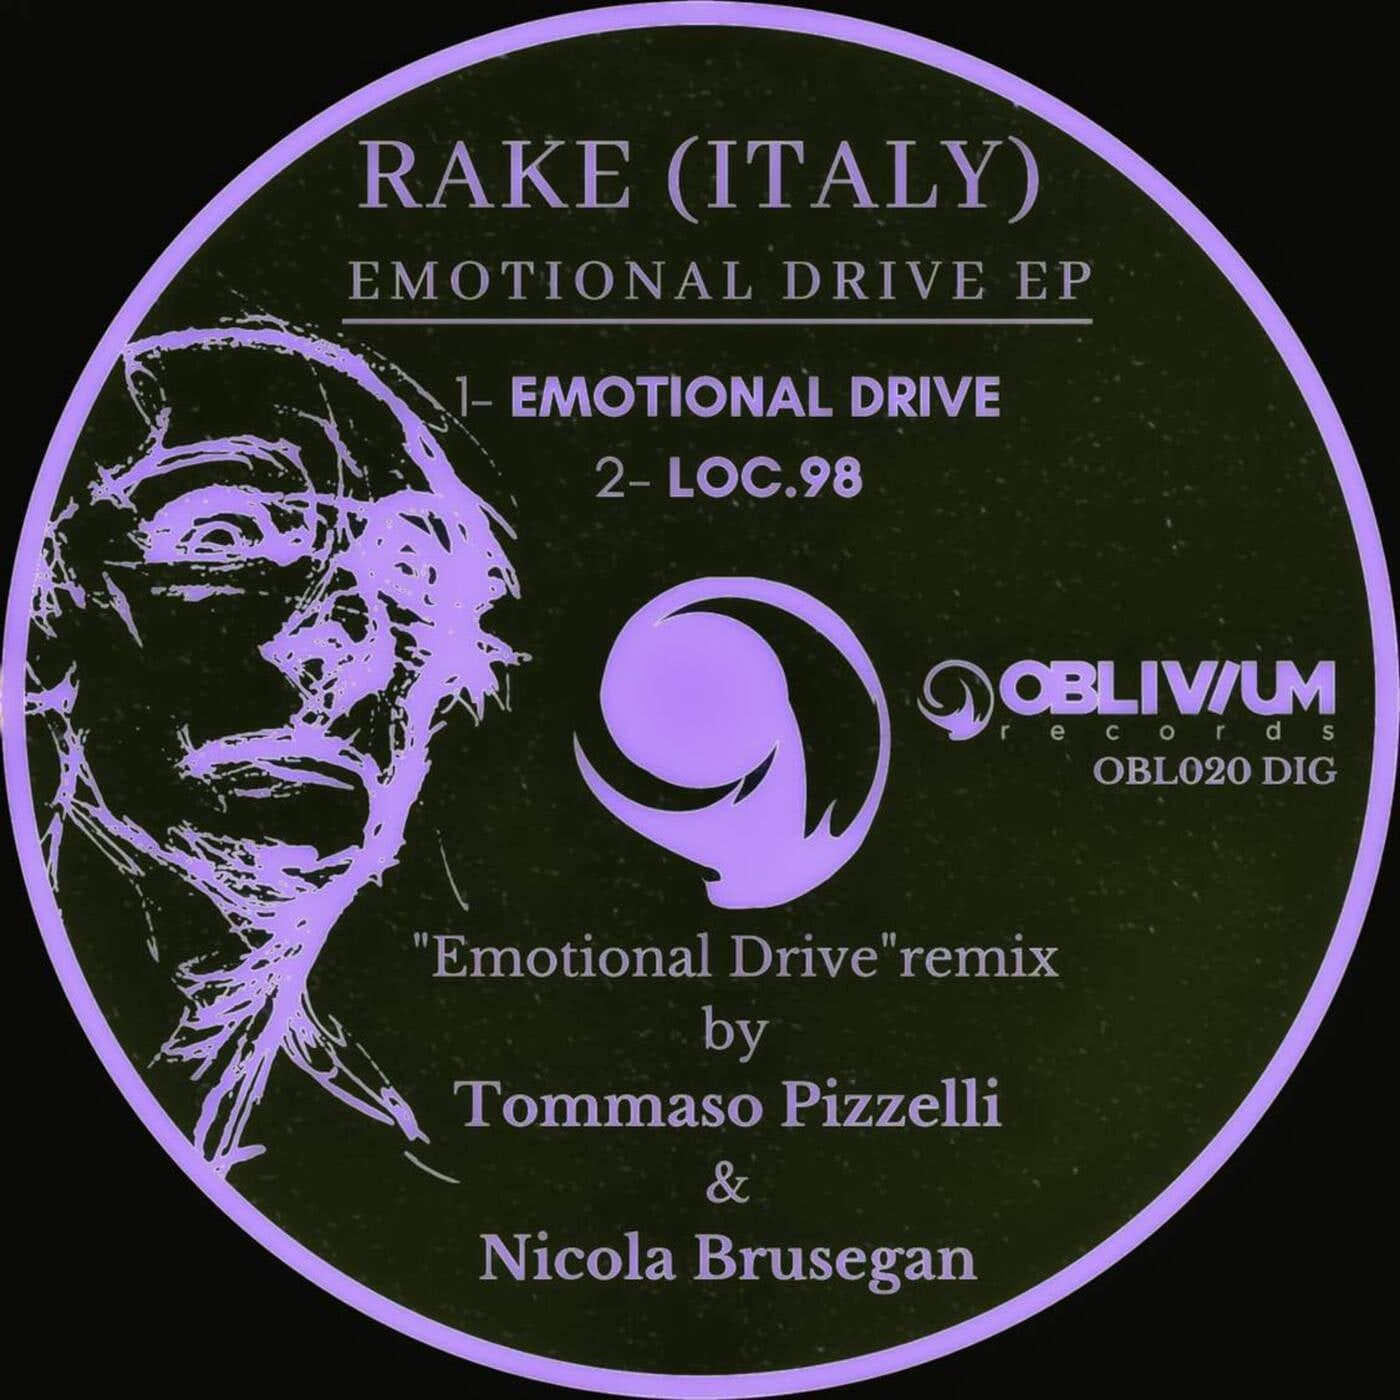 image cover: RaKe (Italy) - Emotional Drive / OBL020